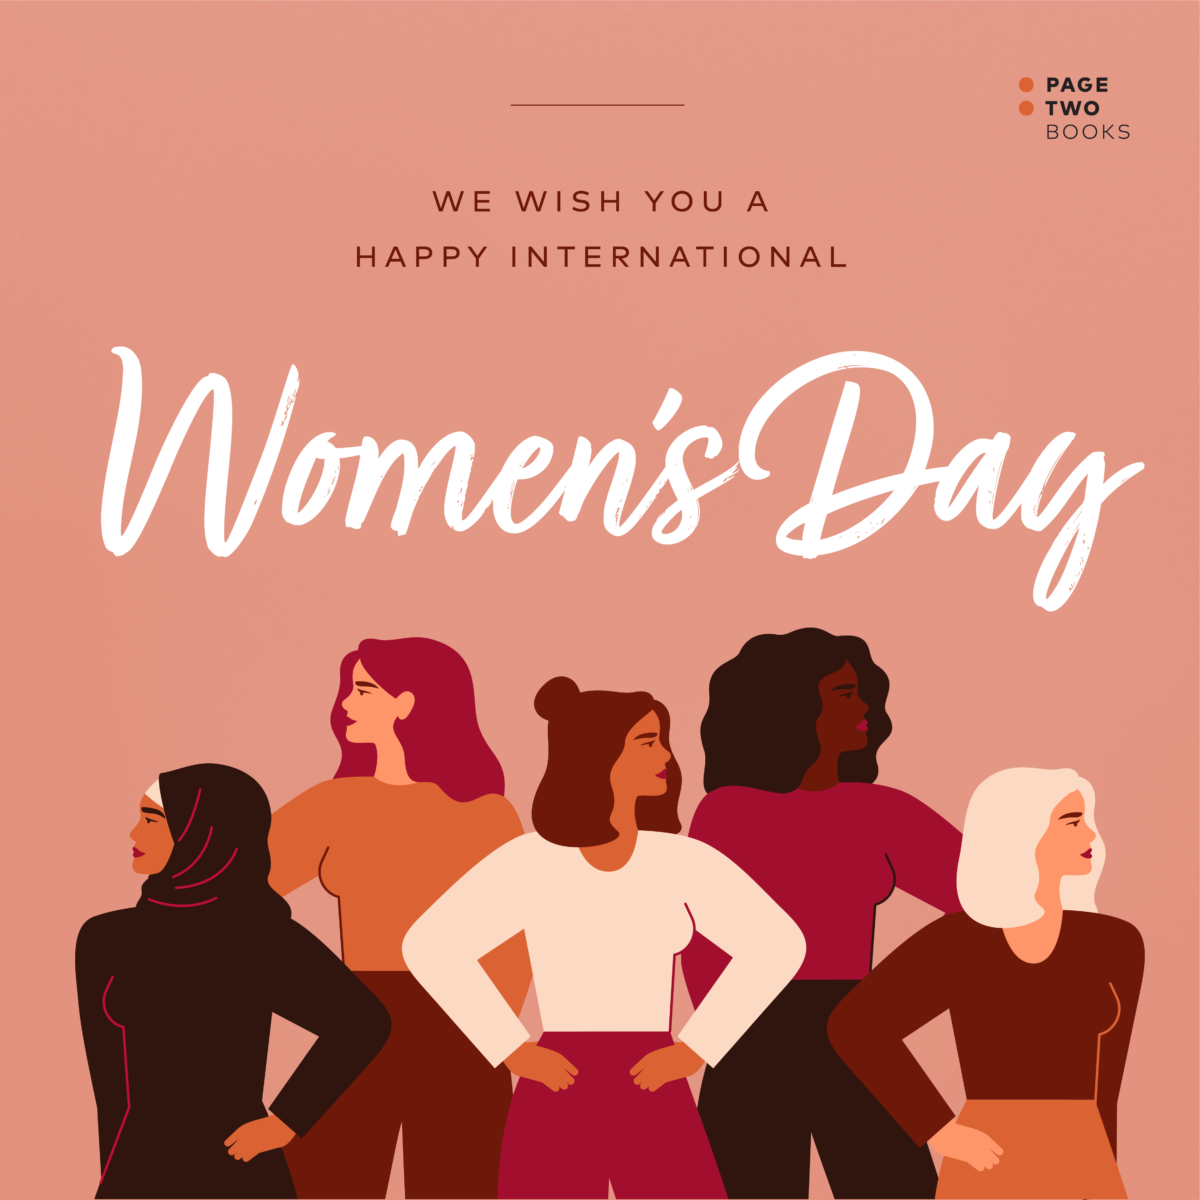 Happy International Women's Day! - Page Two